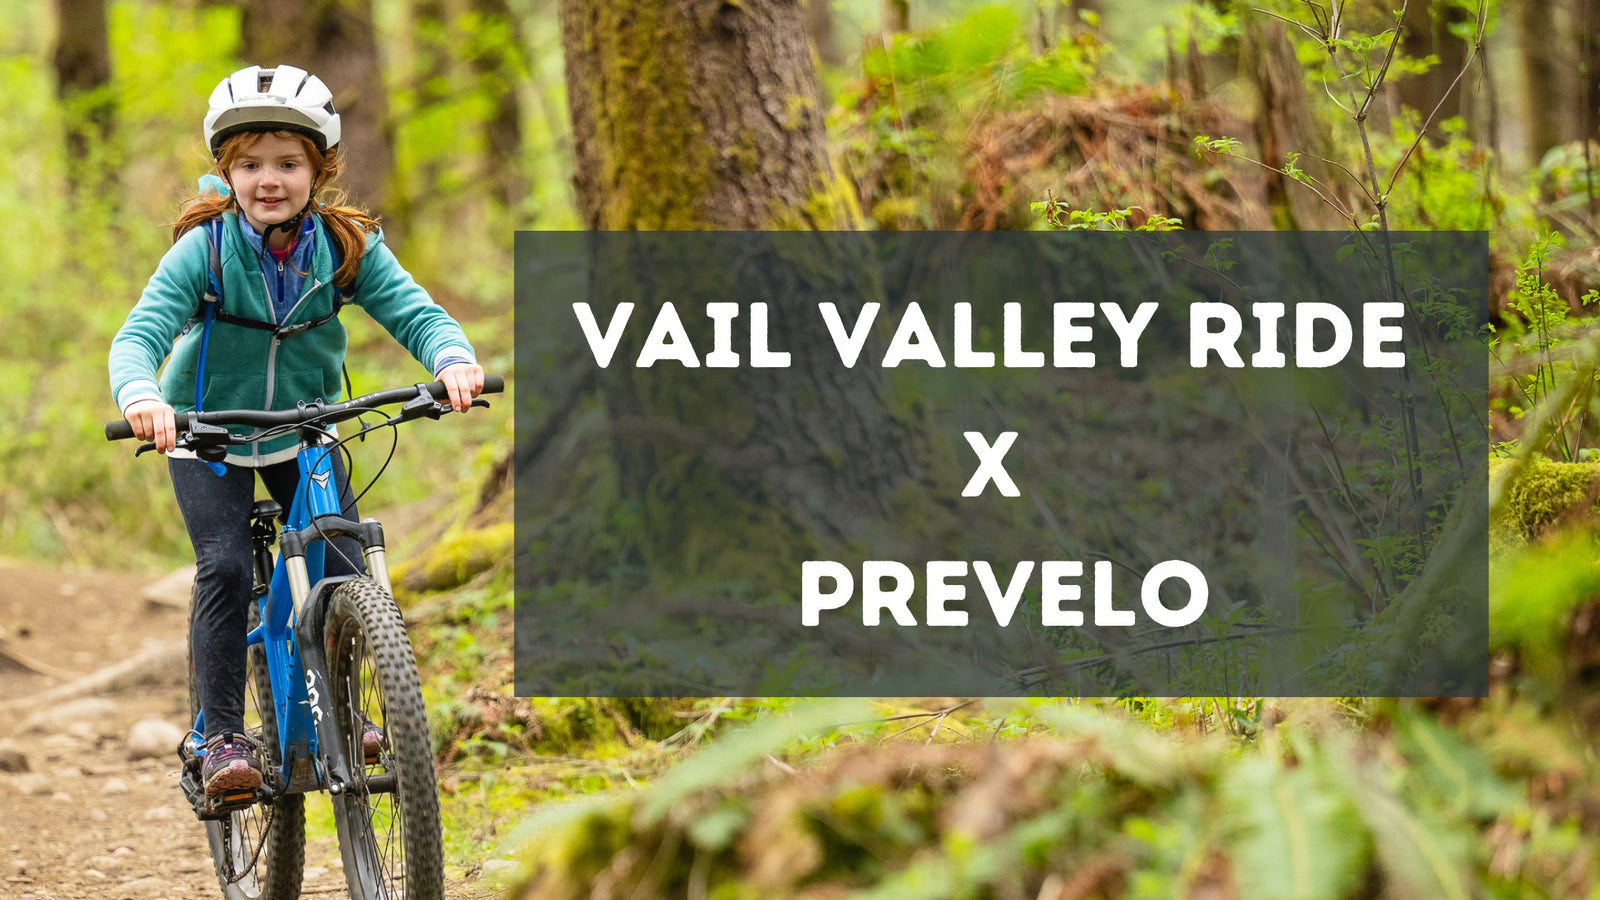 Vail Valley RIDE Embarks on Exciting Collaboration with Prevelo Bikes to Enhance Youth Mountain Biking Experience